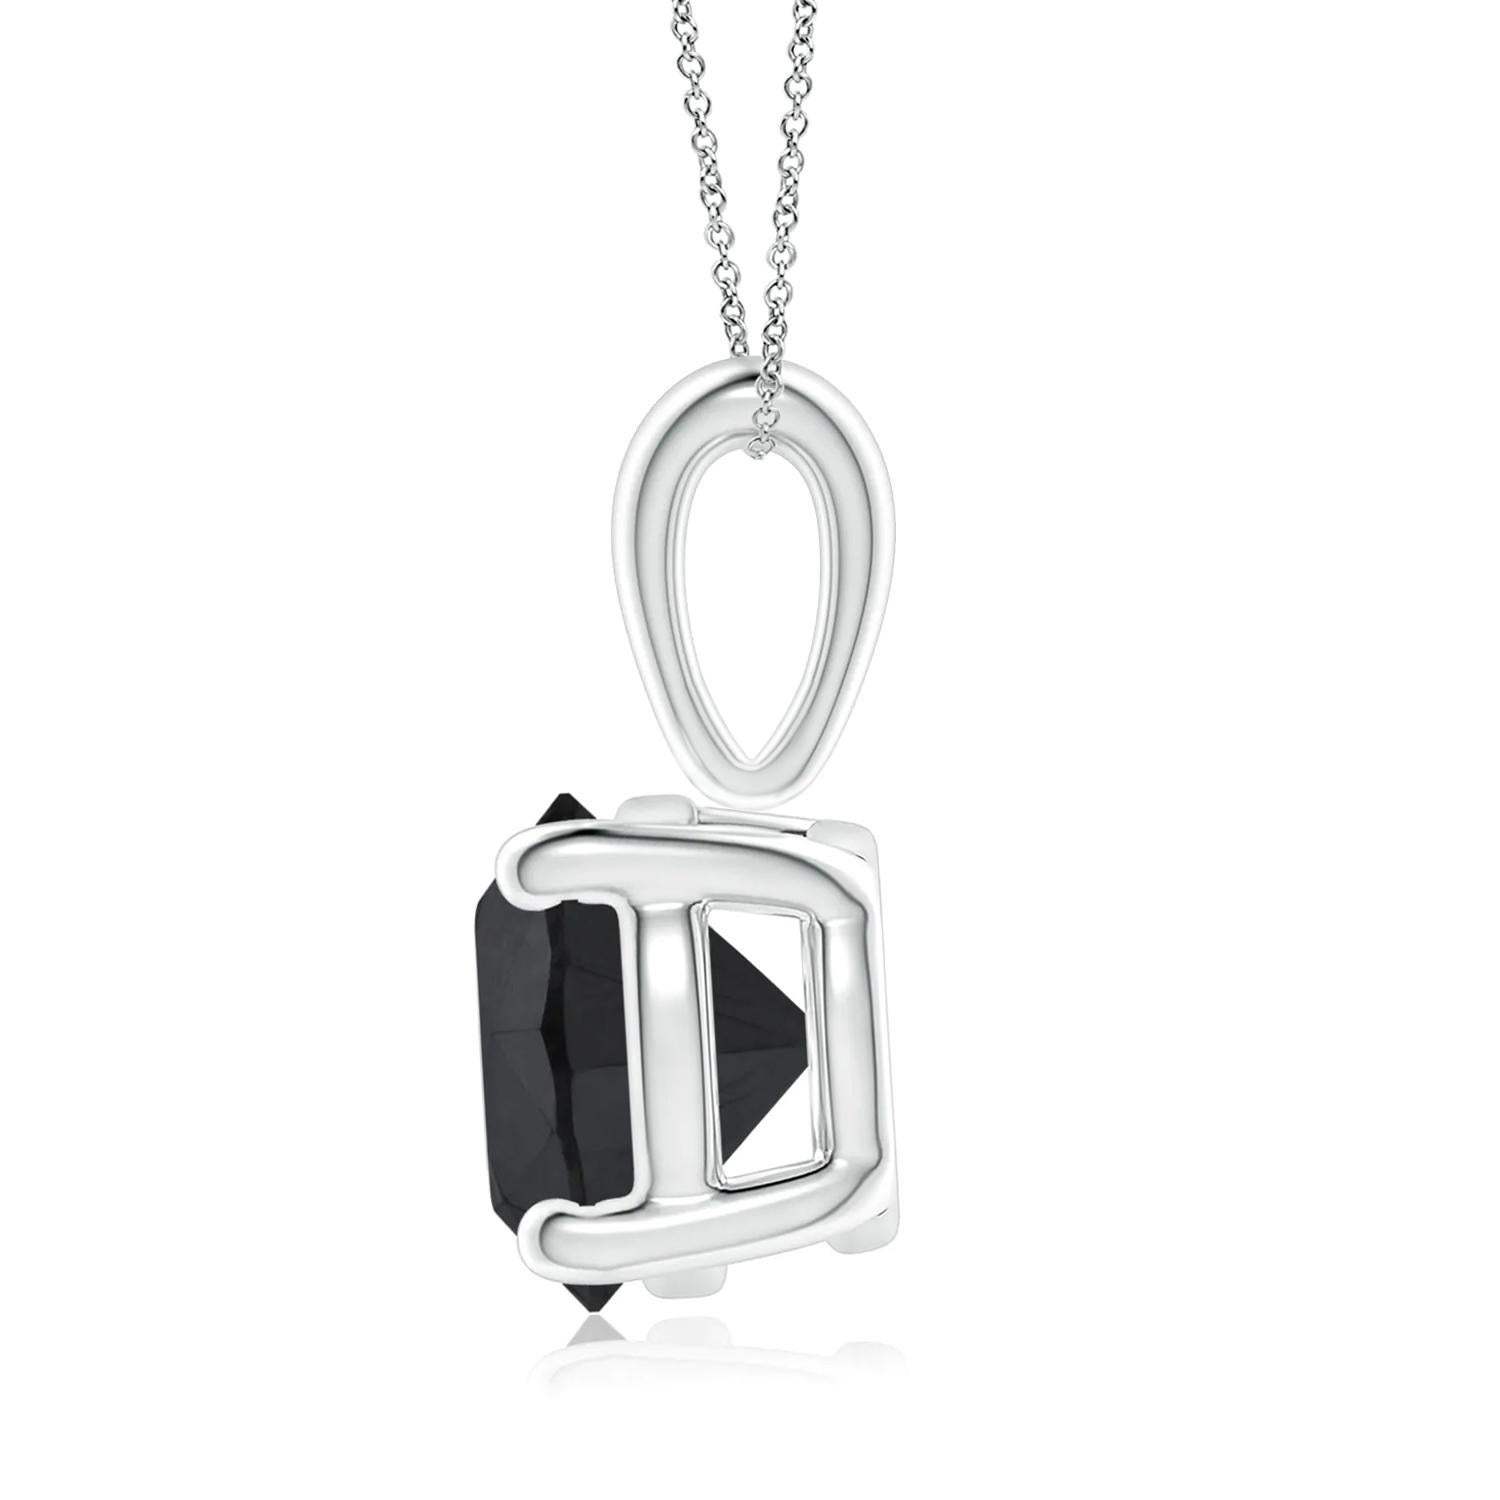 Surprise a special woman in your life with this breathtaking, statement hand crafted solitaire black diamond necklace. This eye-catching pendant necklace features a 1.58 carat round cut black diamond, measuring 6.78 x 6.79 x 5.11 mm set in 14k white